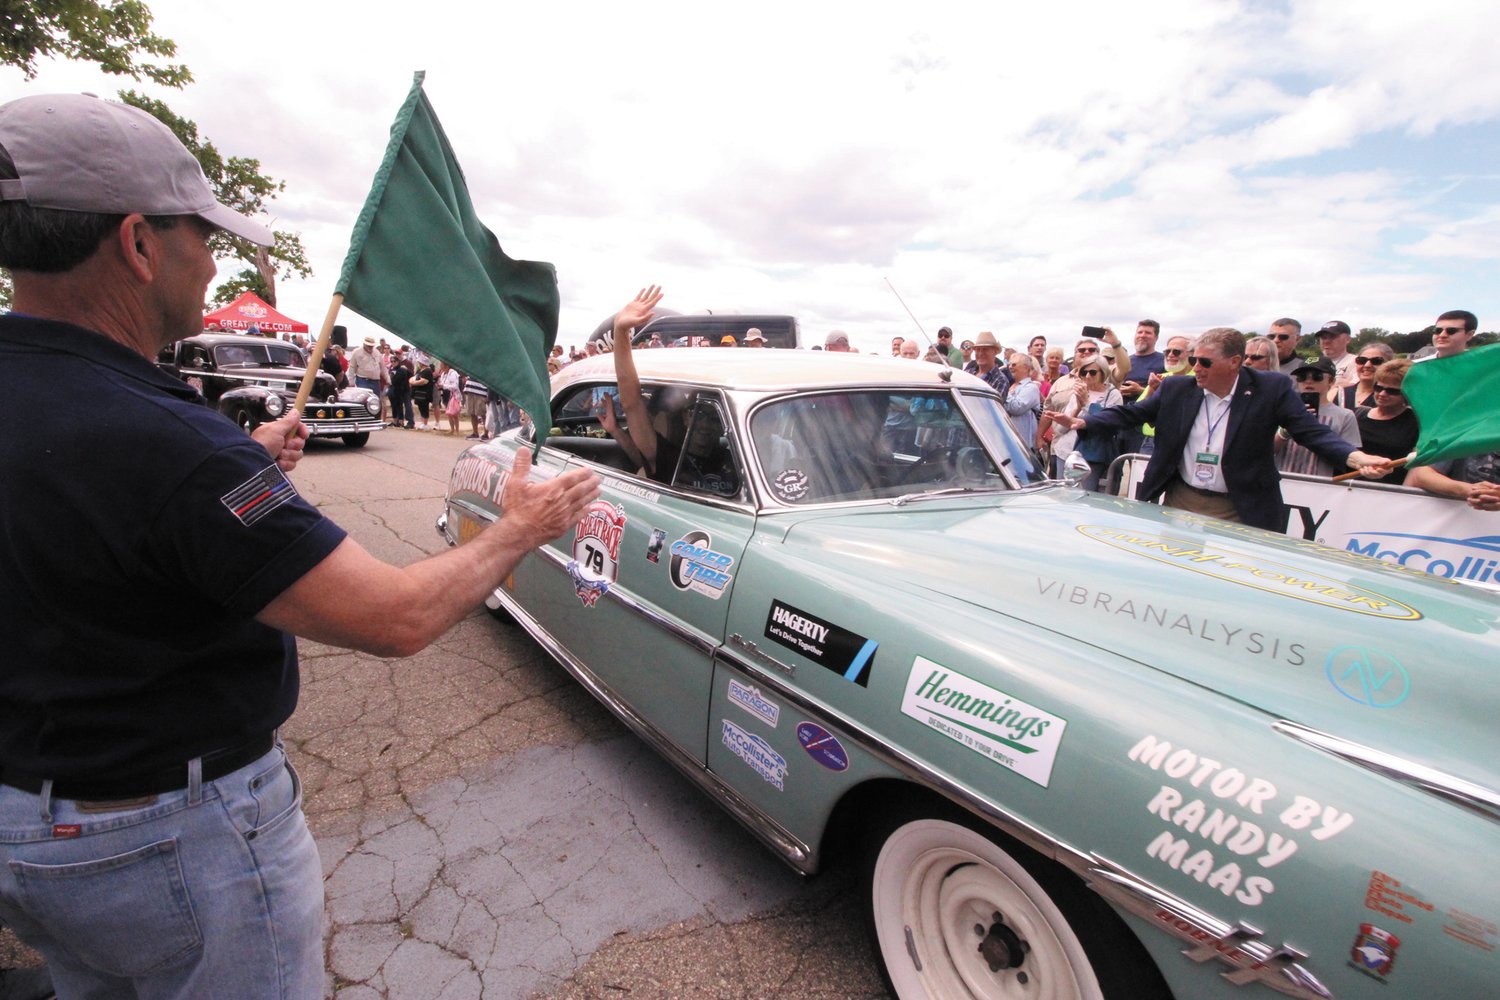 on to fargo: Mayor Frank Picozzi waves the beginning of the Great Race for a Hudson Hornet which he considers to be “greatest car ever manufactured.”